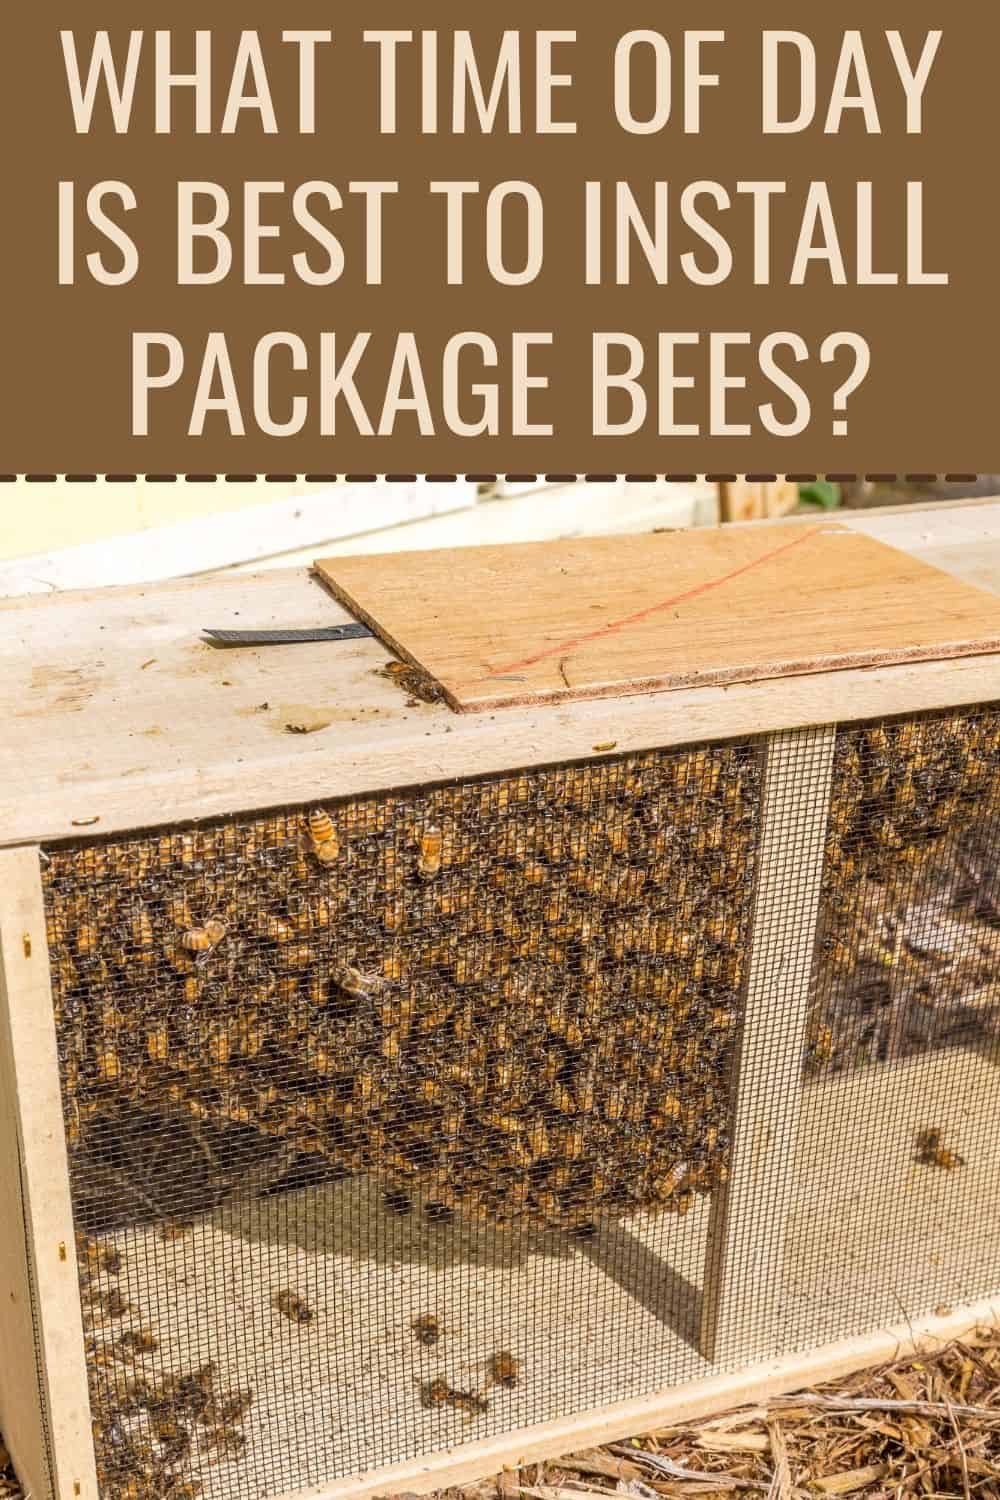 What time of day is best to install package bees?